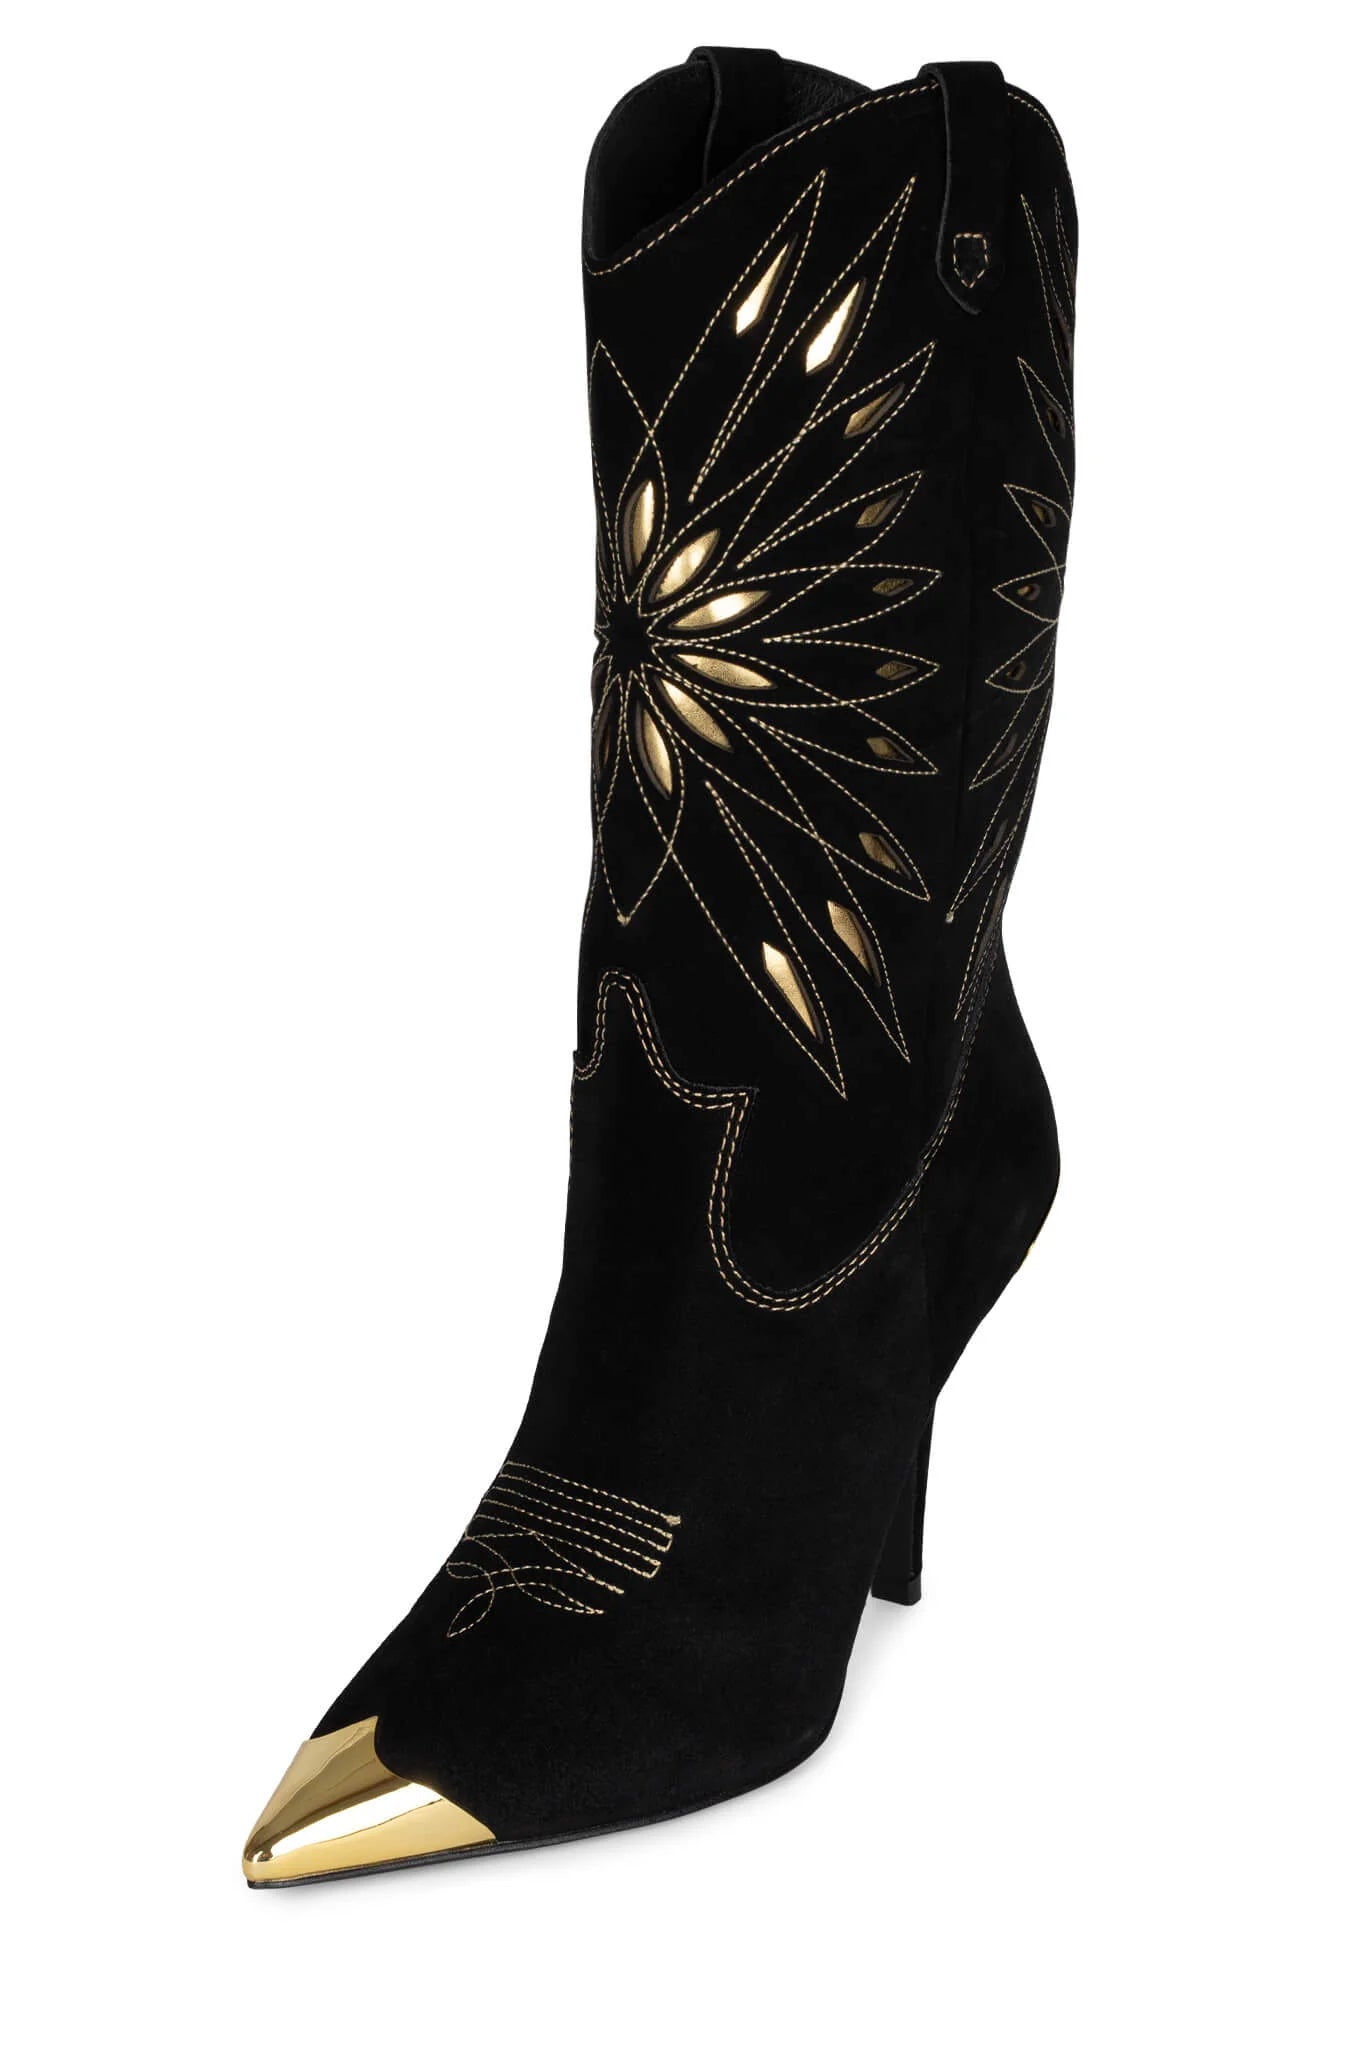 JEFFREY CAMPBELL PASO BOOT - GOLD